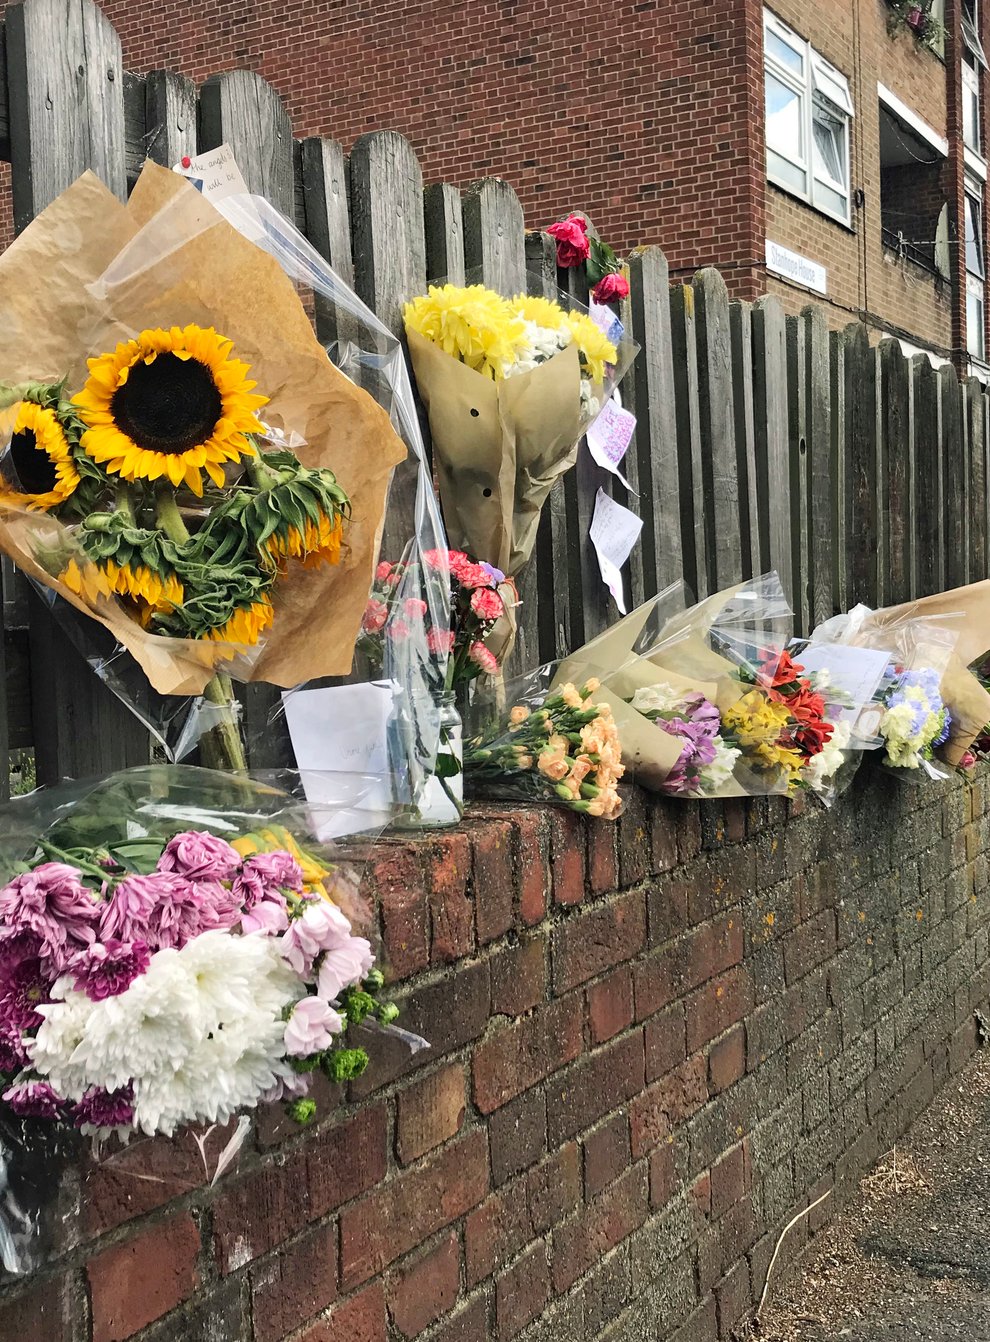 Floral tributes left on a fence near to the scene on Adolphus Street, Deptford, south-east London, where seven-year-old Joel Urhie was found dead after a blaze at his family home (Henry Vaughan/PA)